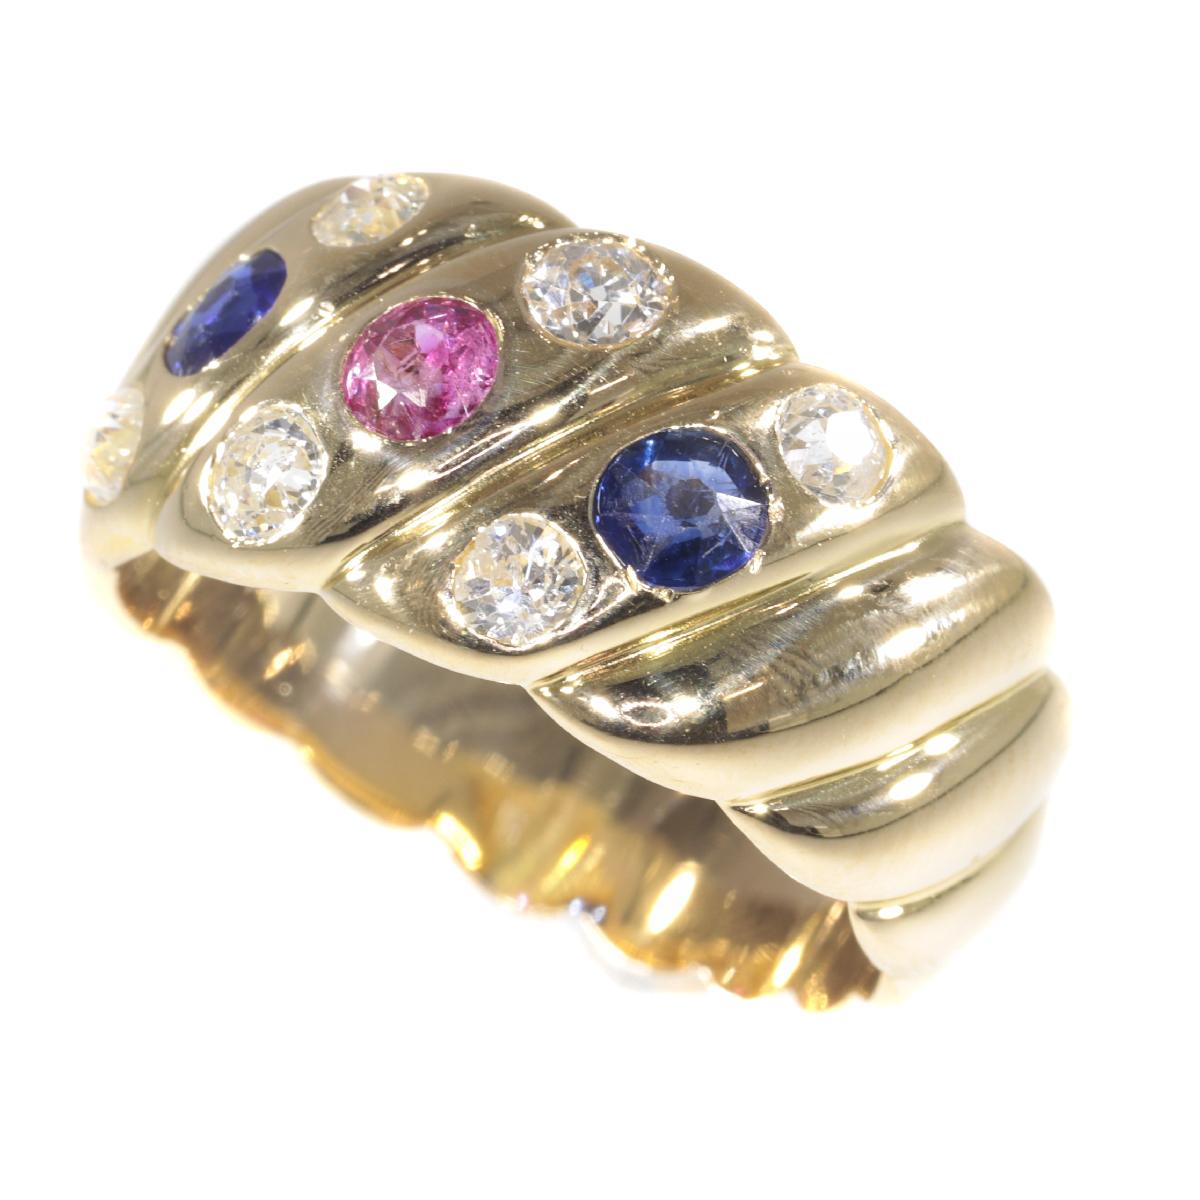 Antique 18 Karat Gold Victorian Diamond Sapphire and Ruby Engagement Ring, 1880s For Sale 1